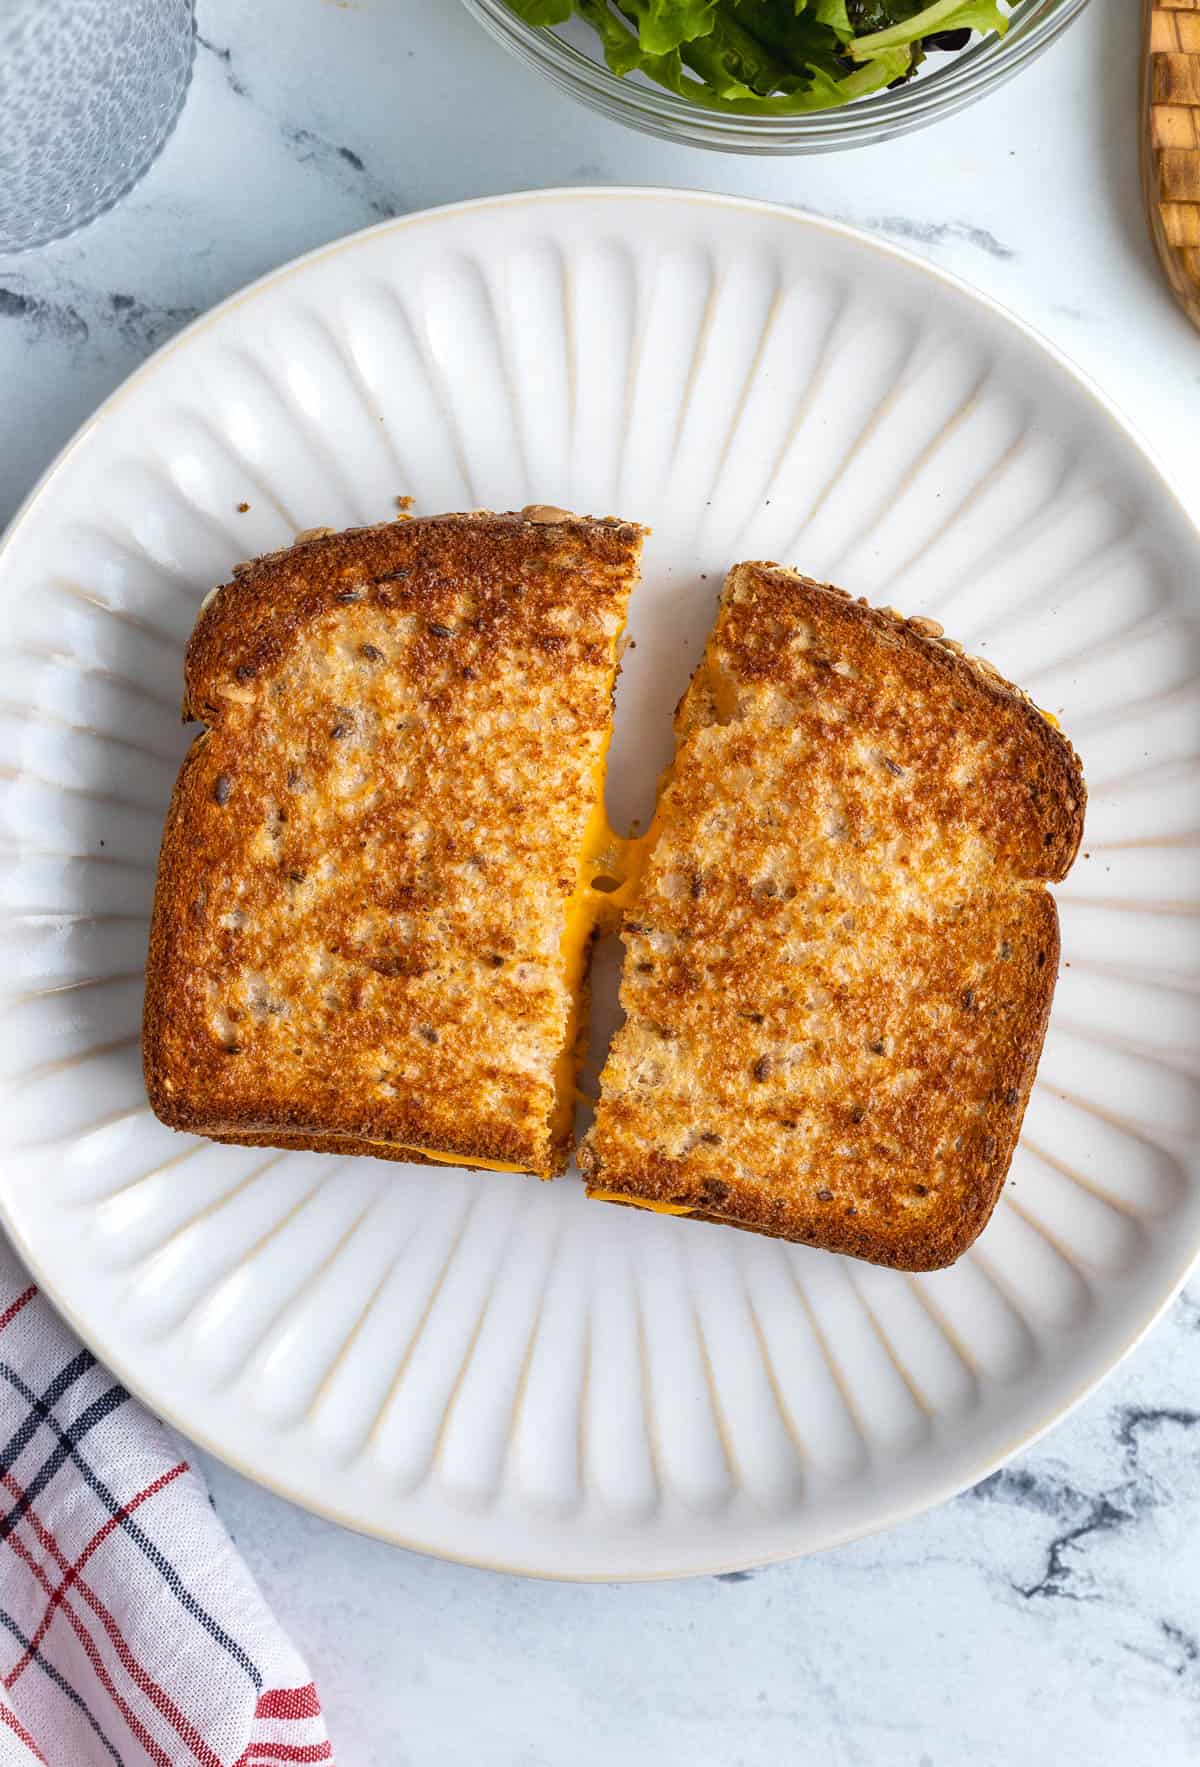 A grilled cheese cut in half with cheese stretching between the halves.